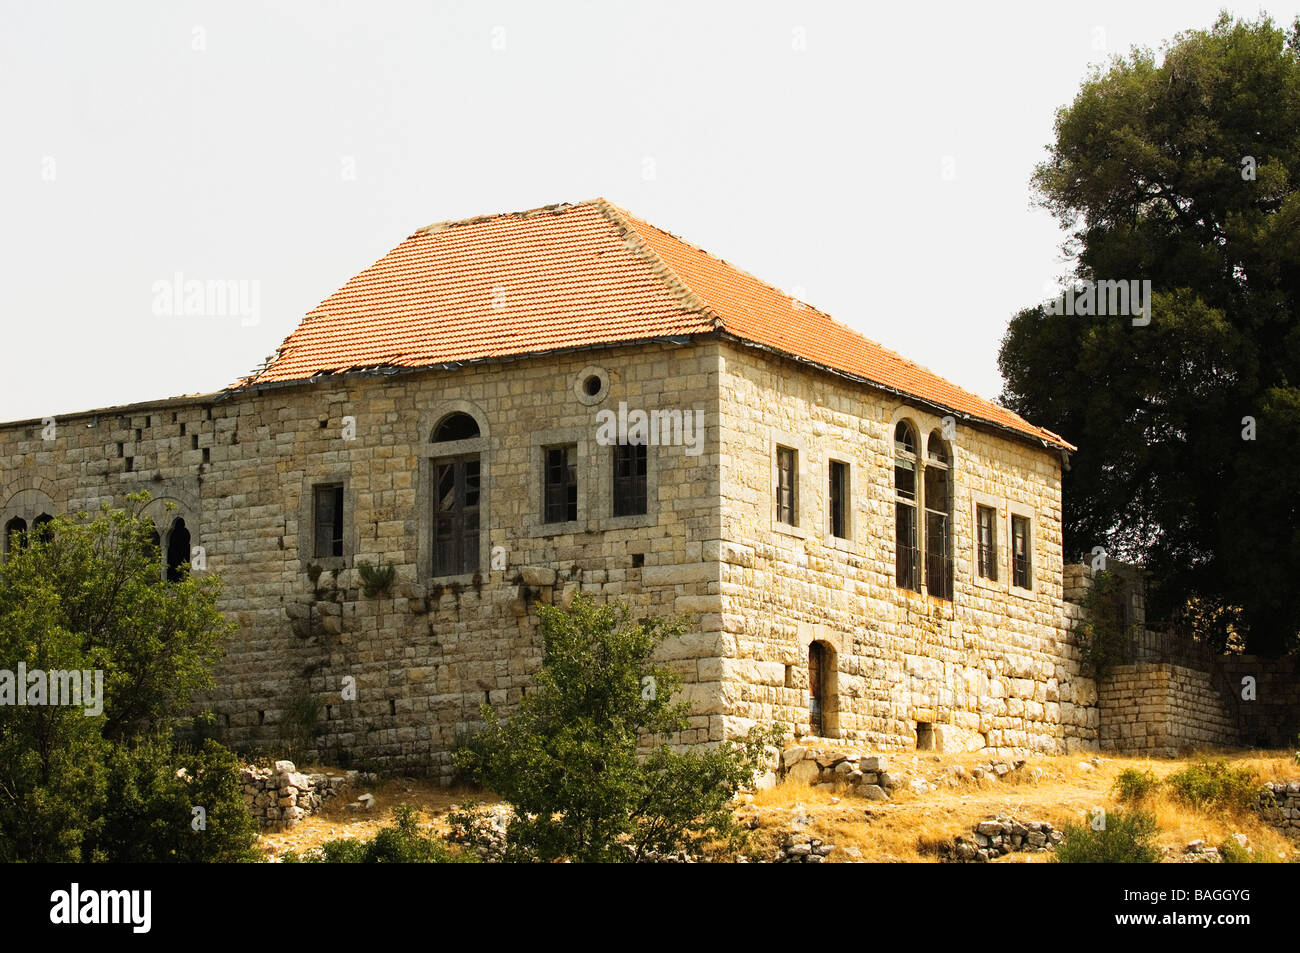 Deserted and derelict house in Lebanon Middle East Stock Photo